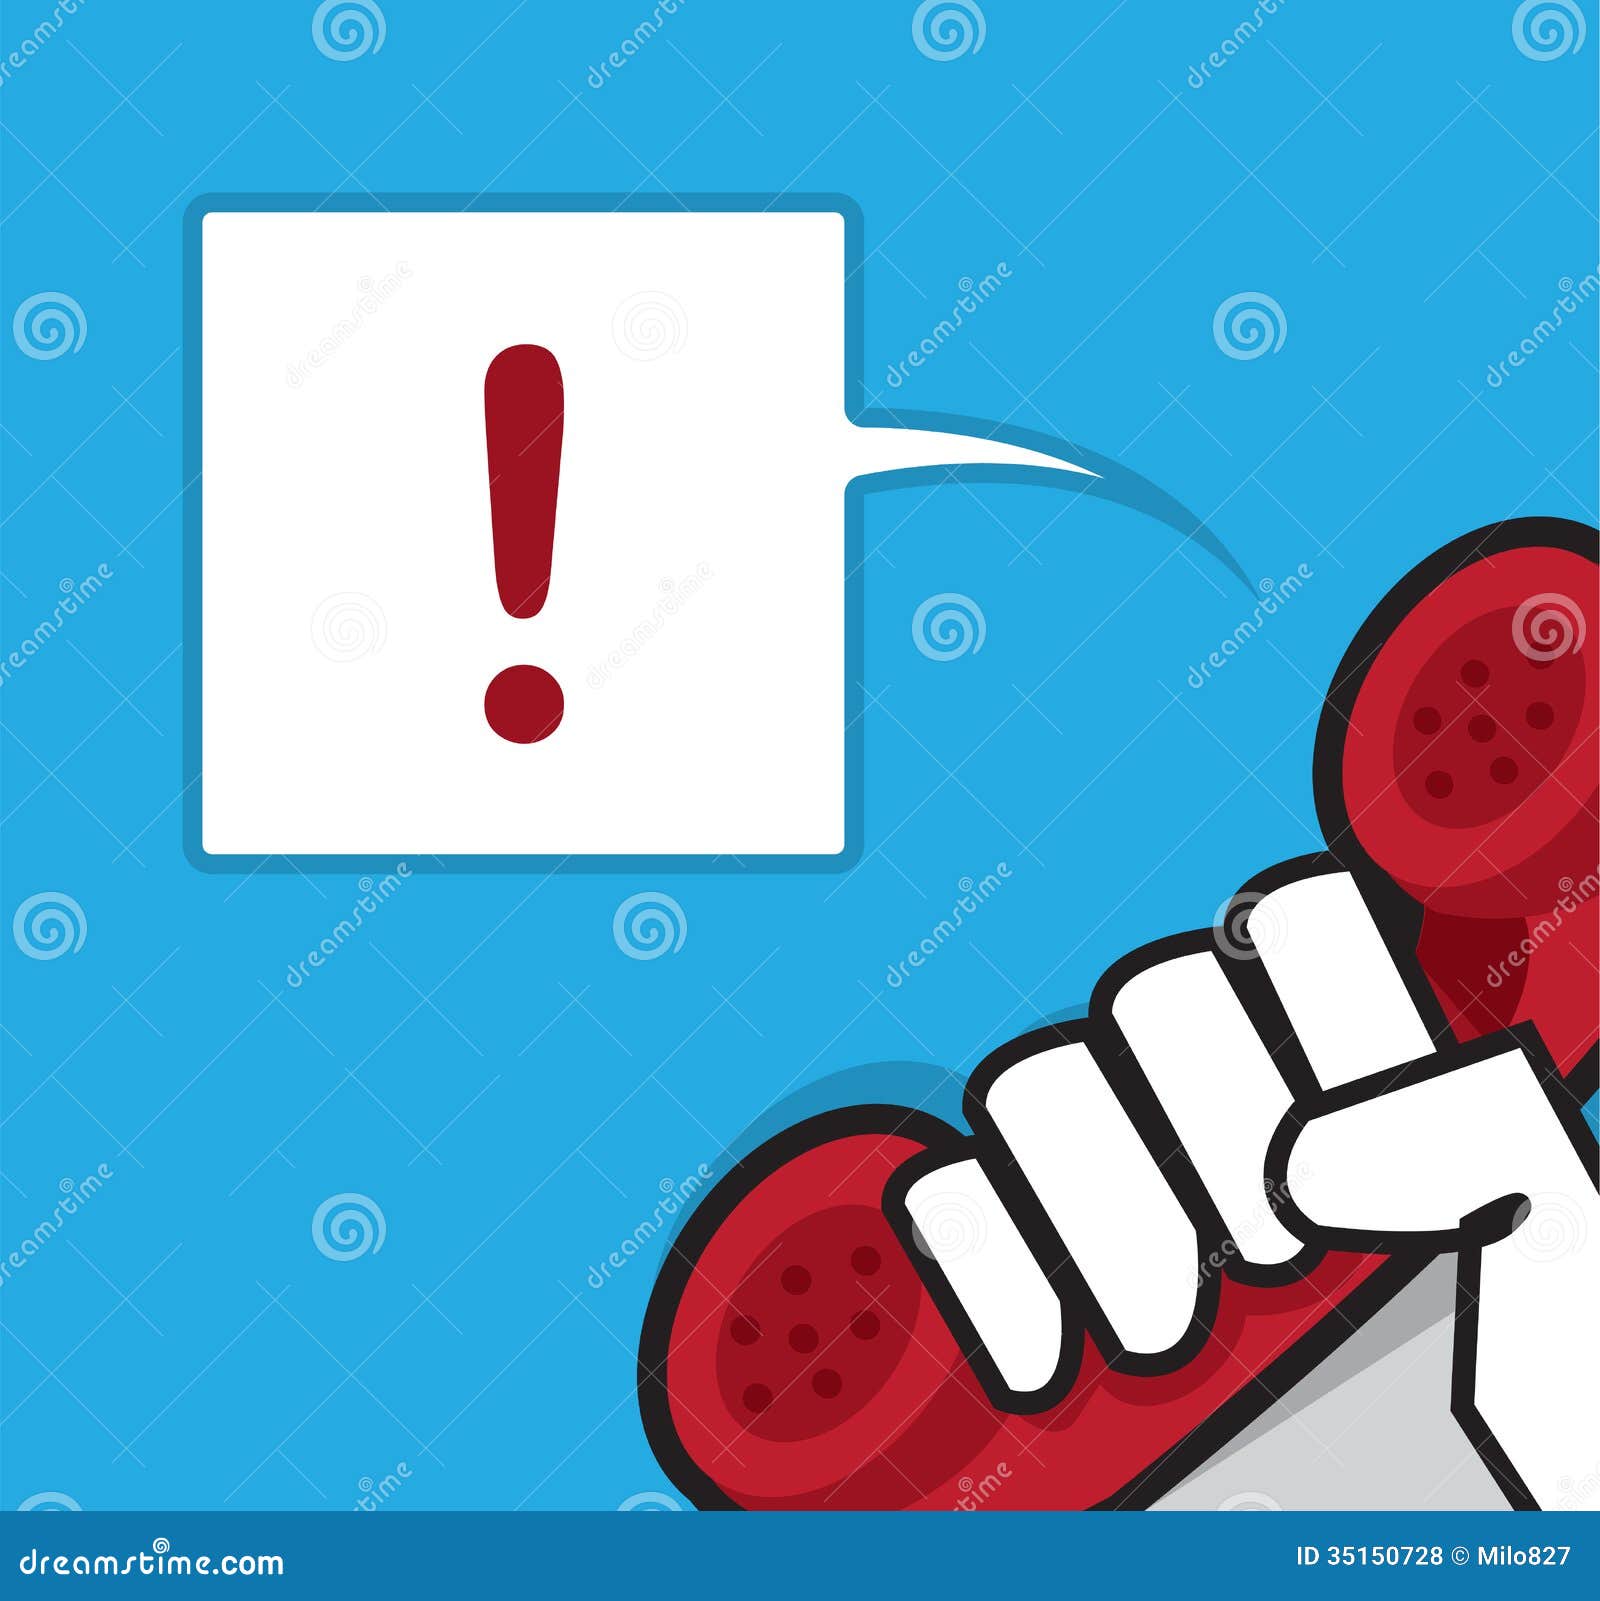 Phone Held Red Exclamation stock vector. Illustration of device - 35150728